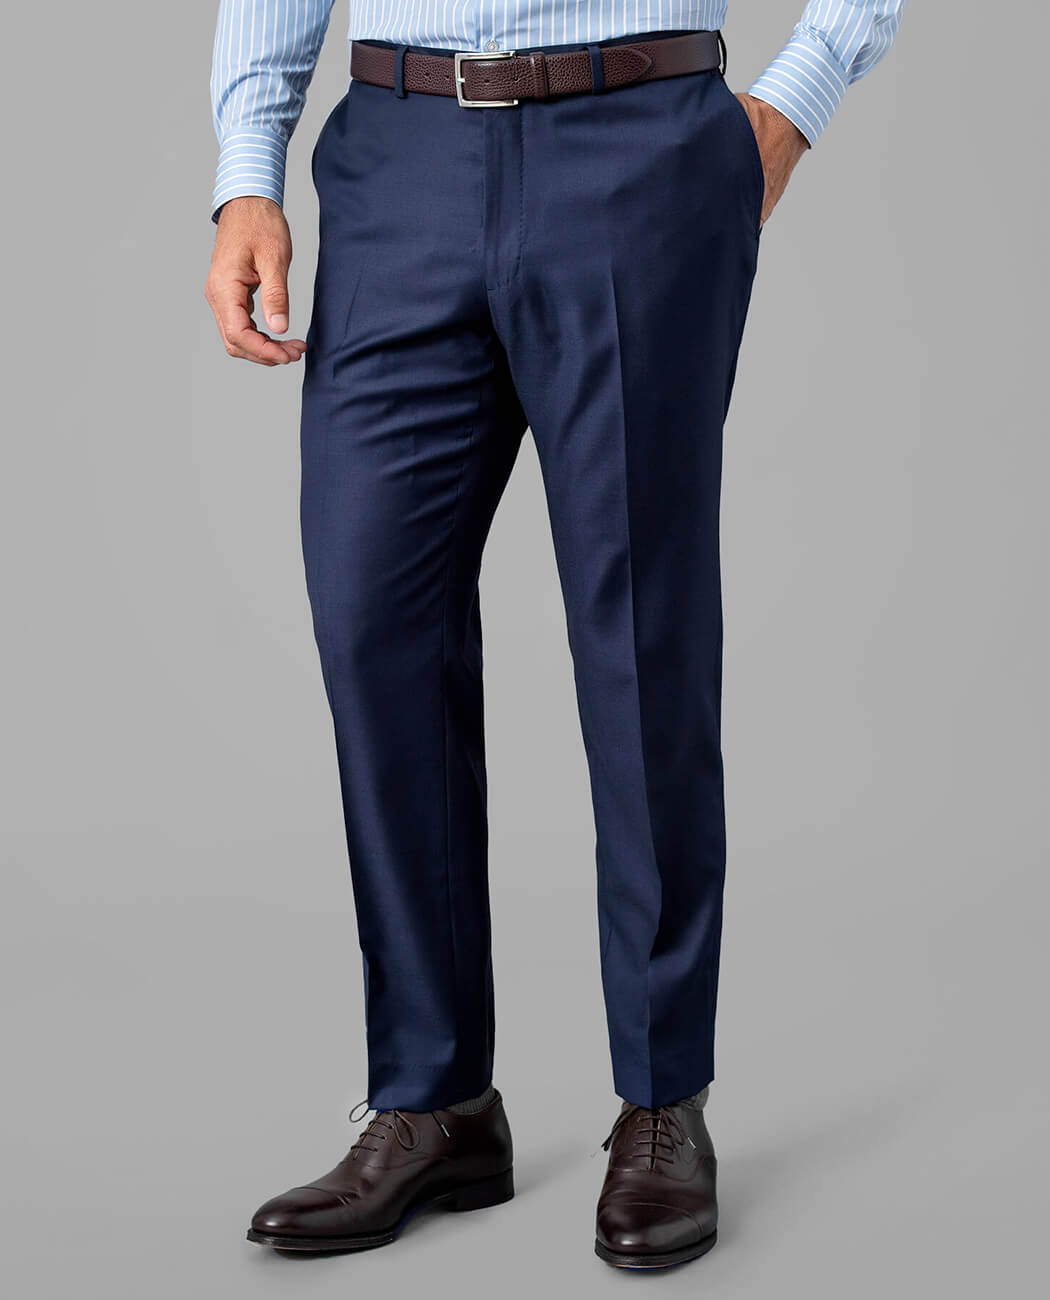 What colour pants suit for white shirt and dark blue waistcoat  Quora